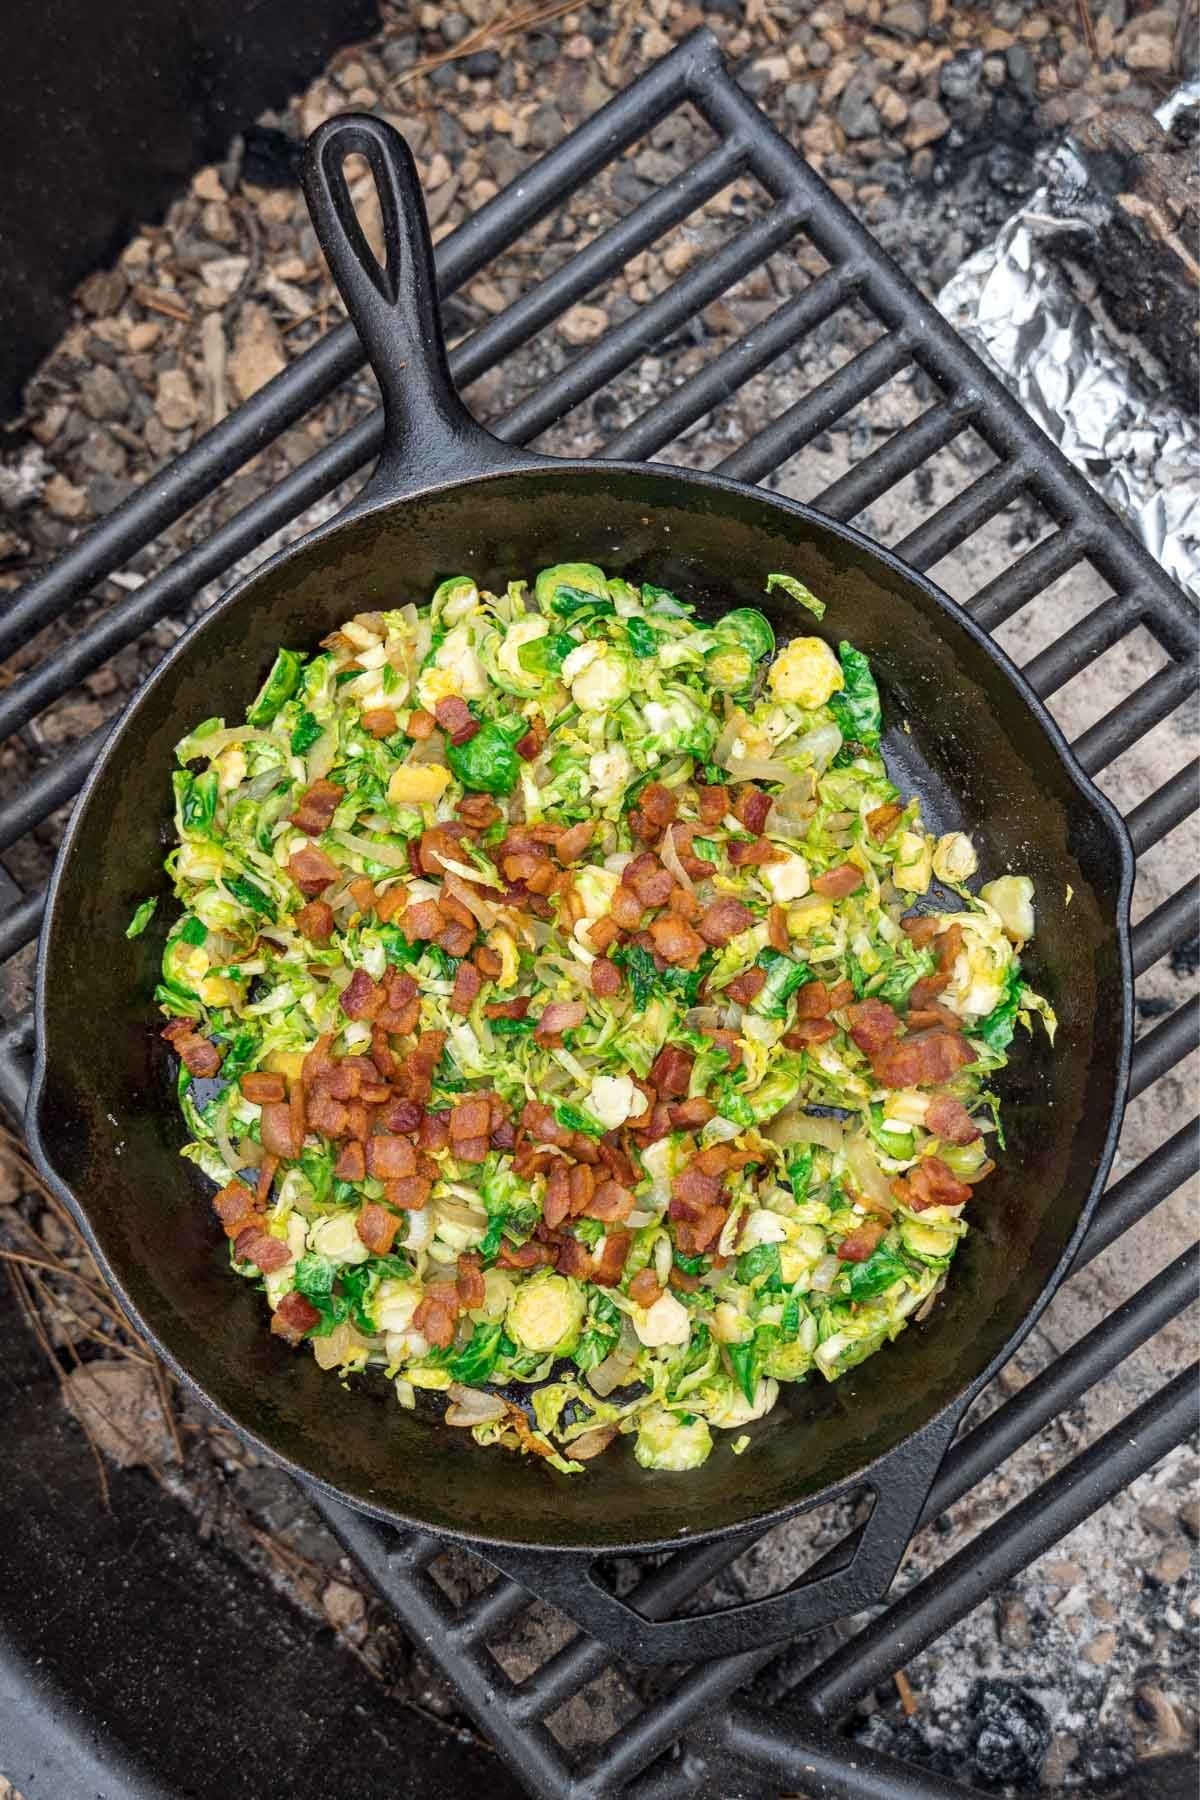 Brussels sprouts and bacon in a cast iron skillet over a campfire